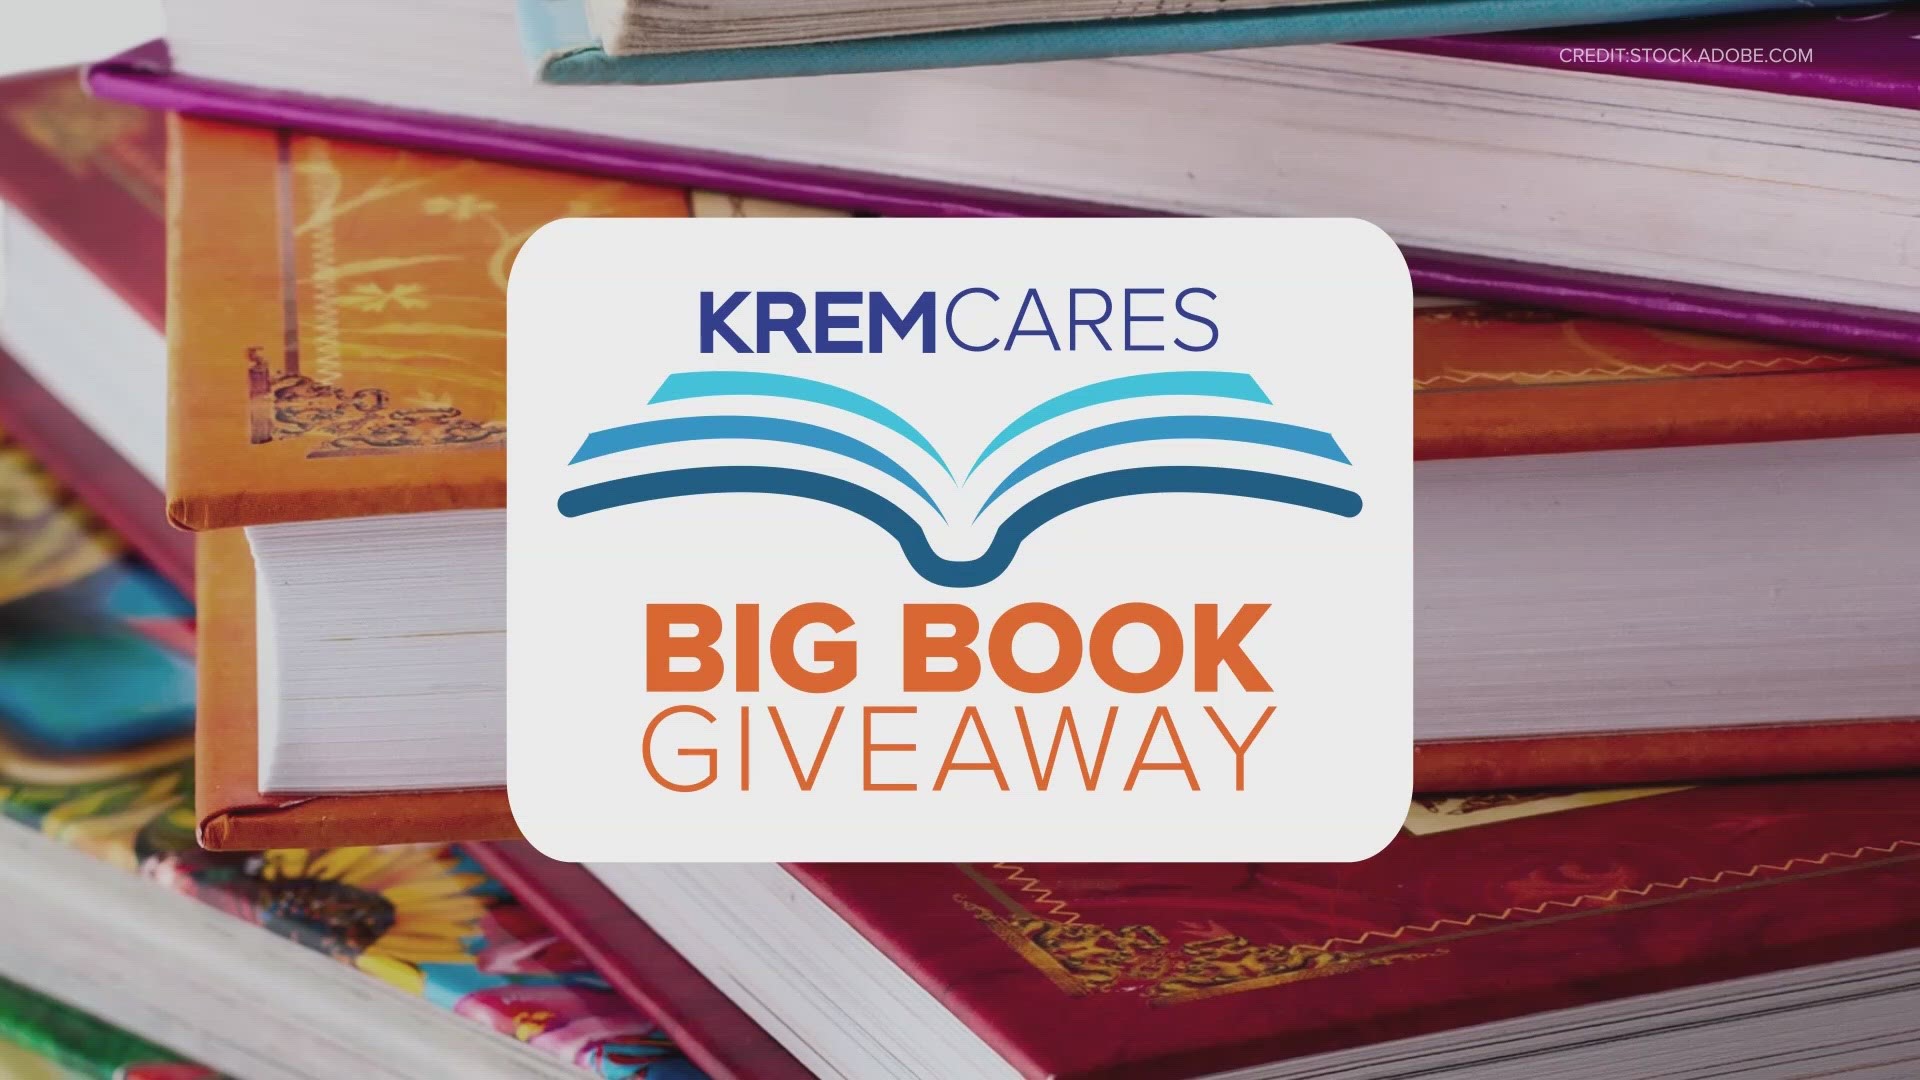 The Krem Cares Big Book Giveaway's mission is to help raise reading rates amongst children in the greater Spokane area.